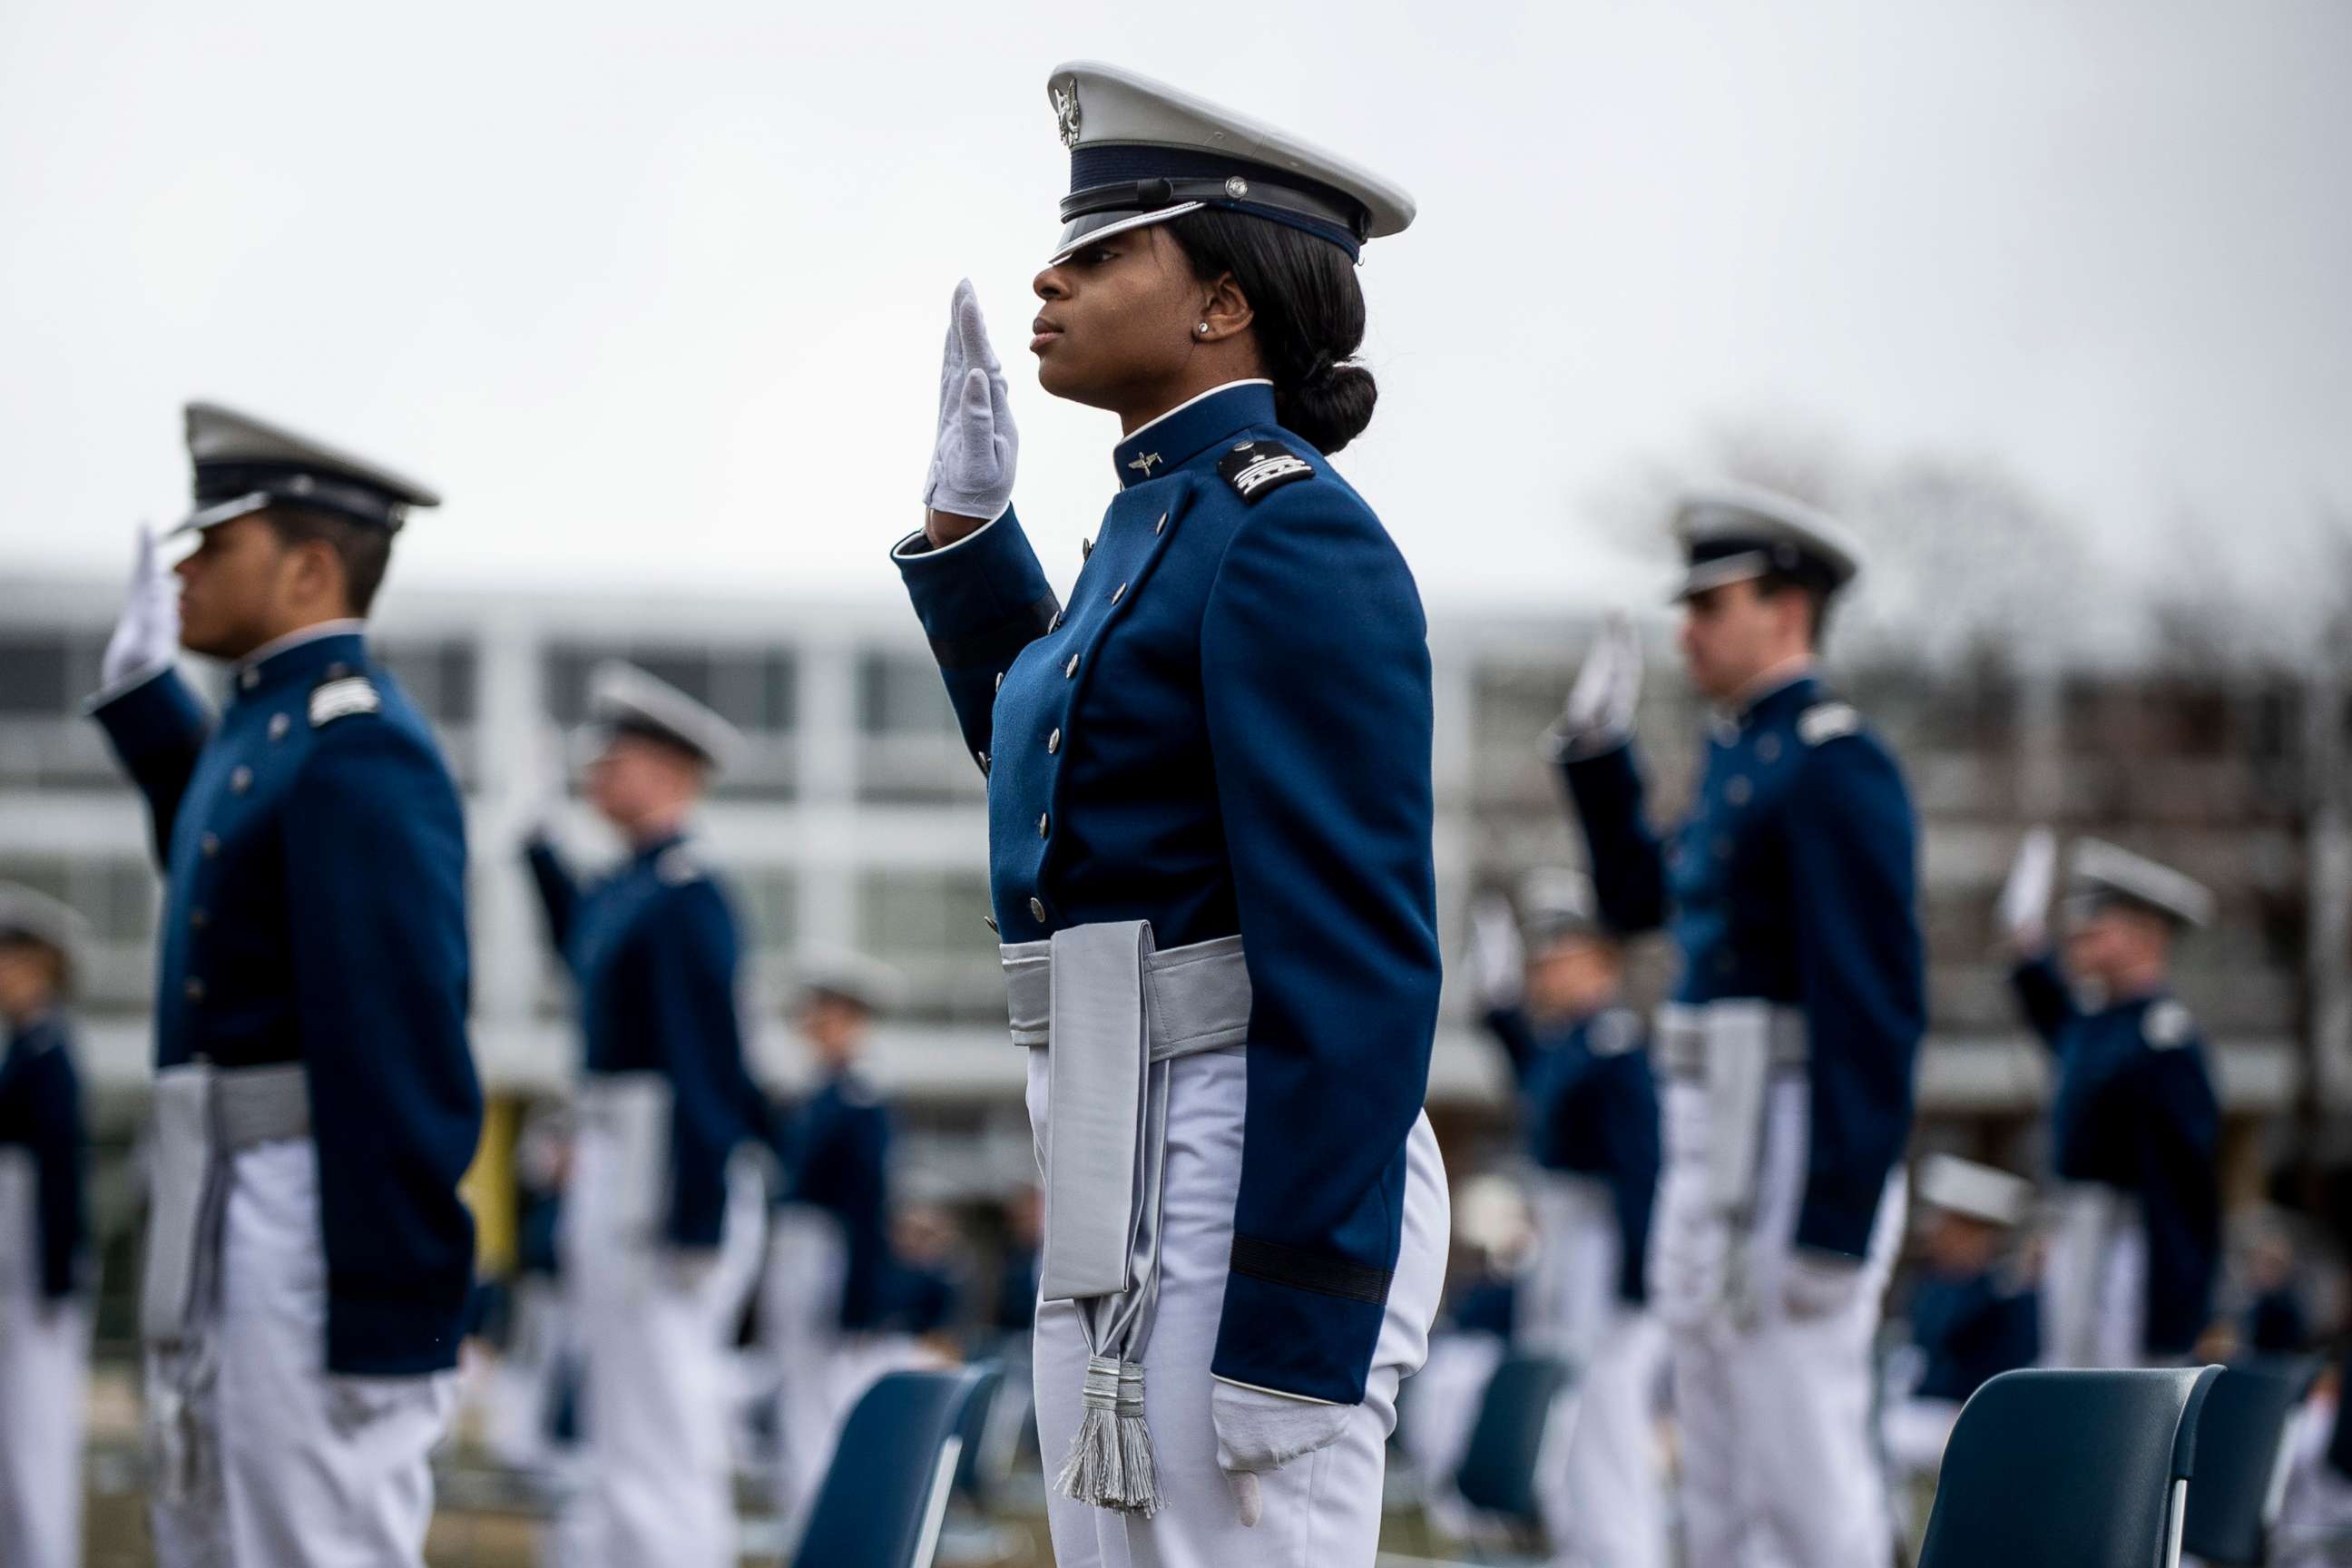 PHOTO: In this April 18, 2020, file photo, Air Force Academy cadets take an oath during their graduation ceremony in Colorado Springs, Colo.